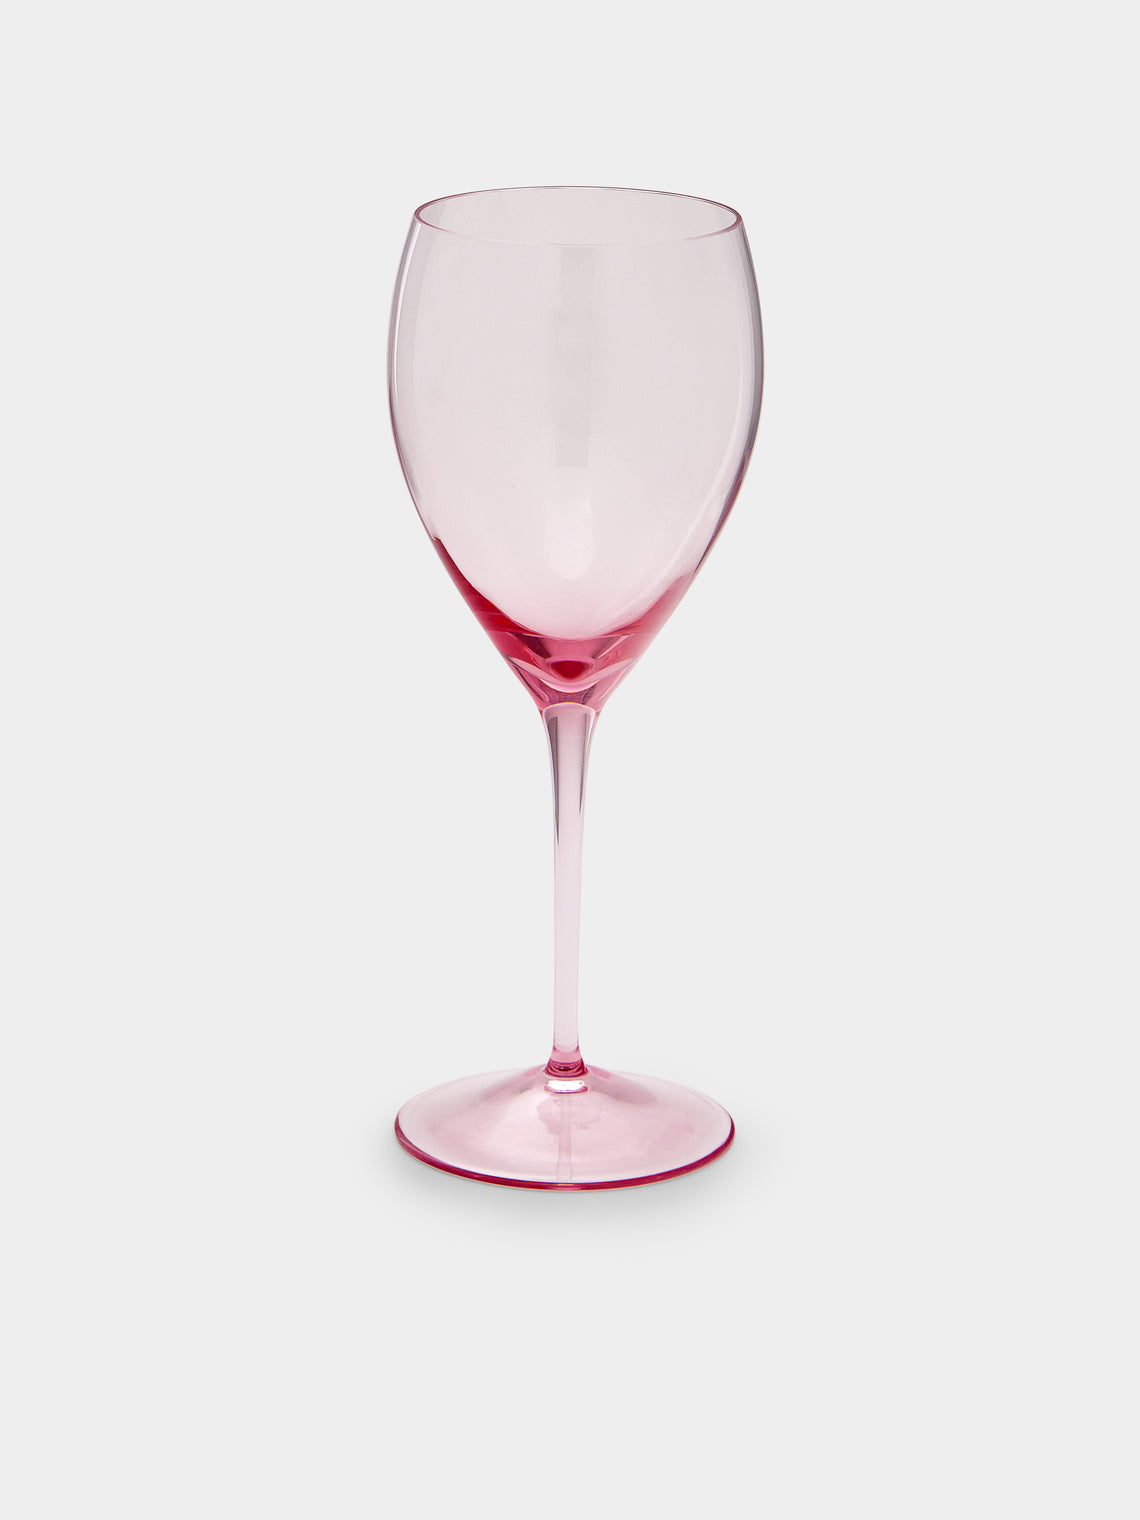 Moser - Optic Crystal White Wine Glass (Set of 2) - Pink - ABASK - 